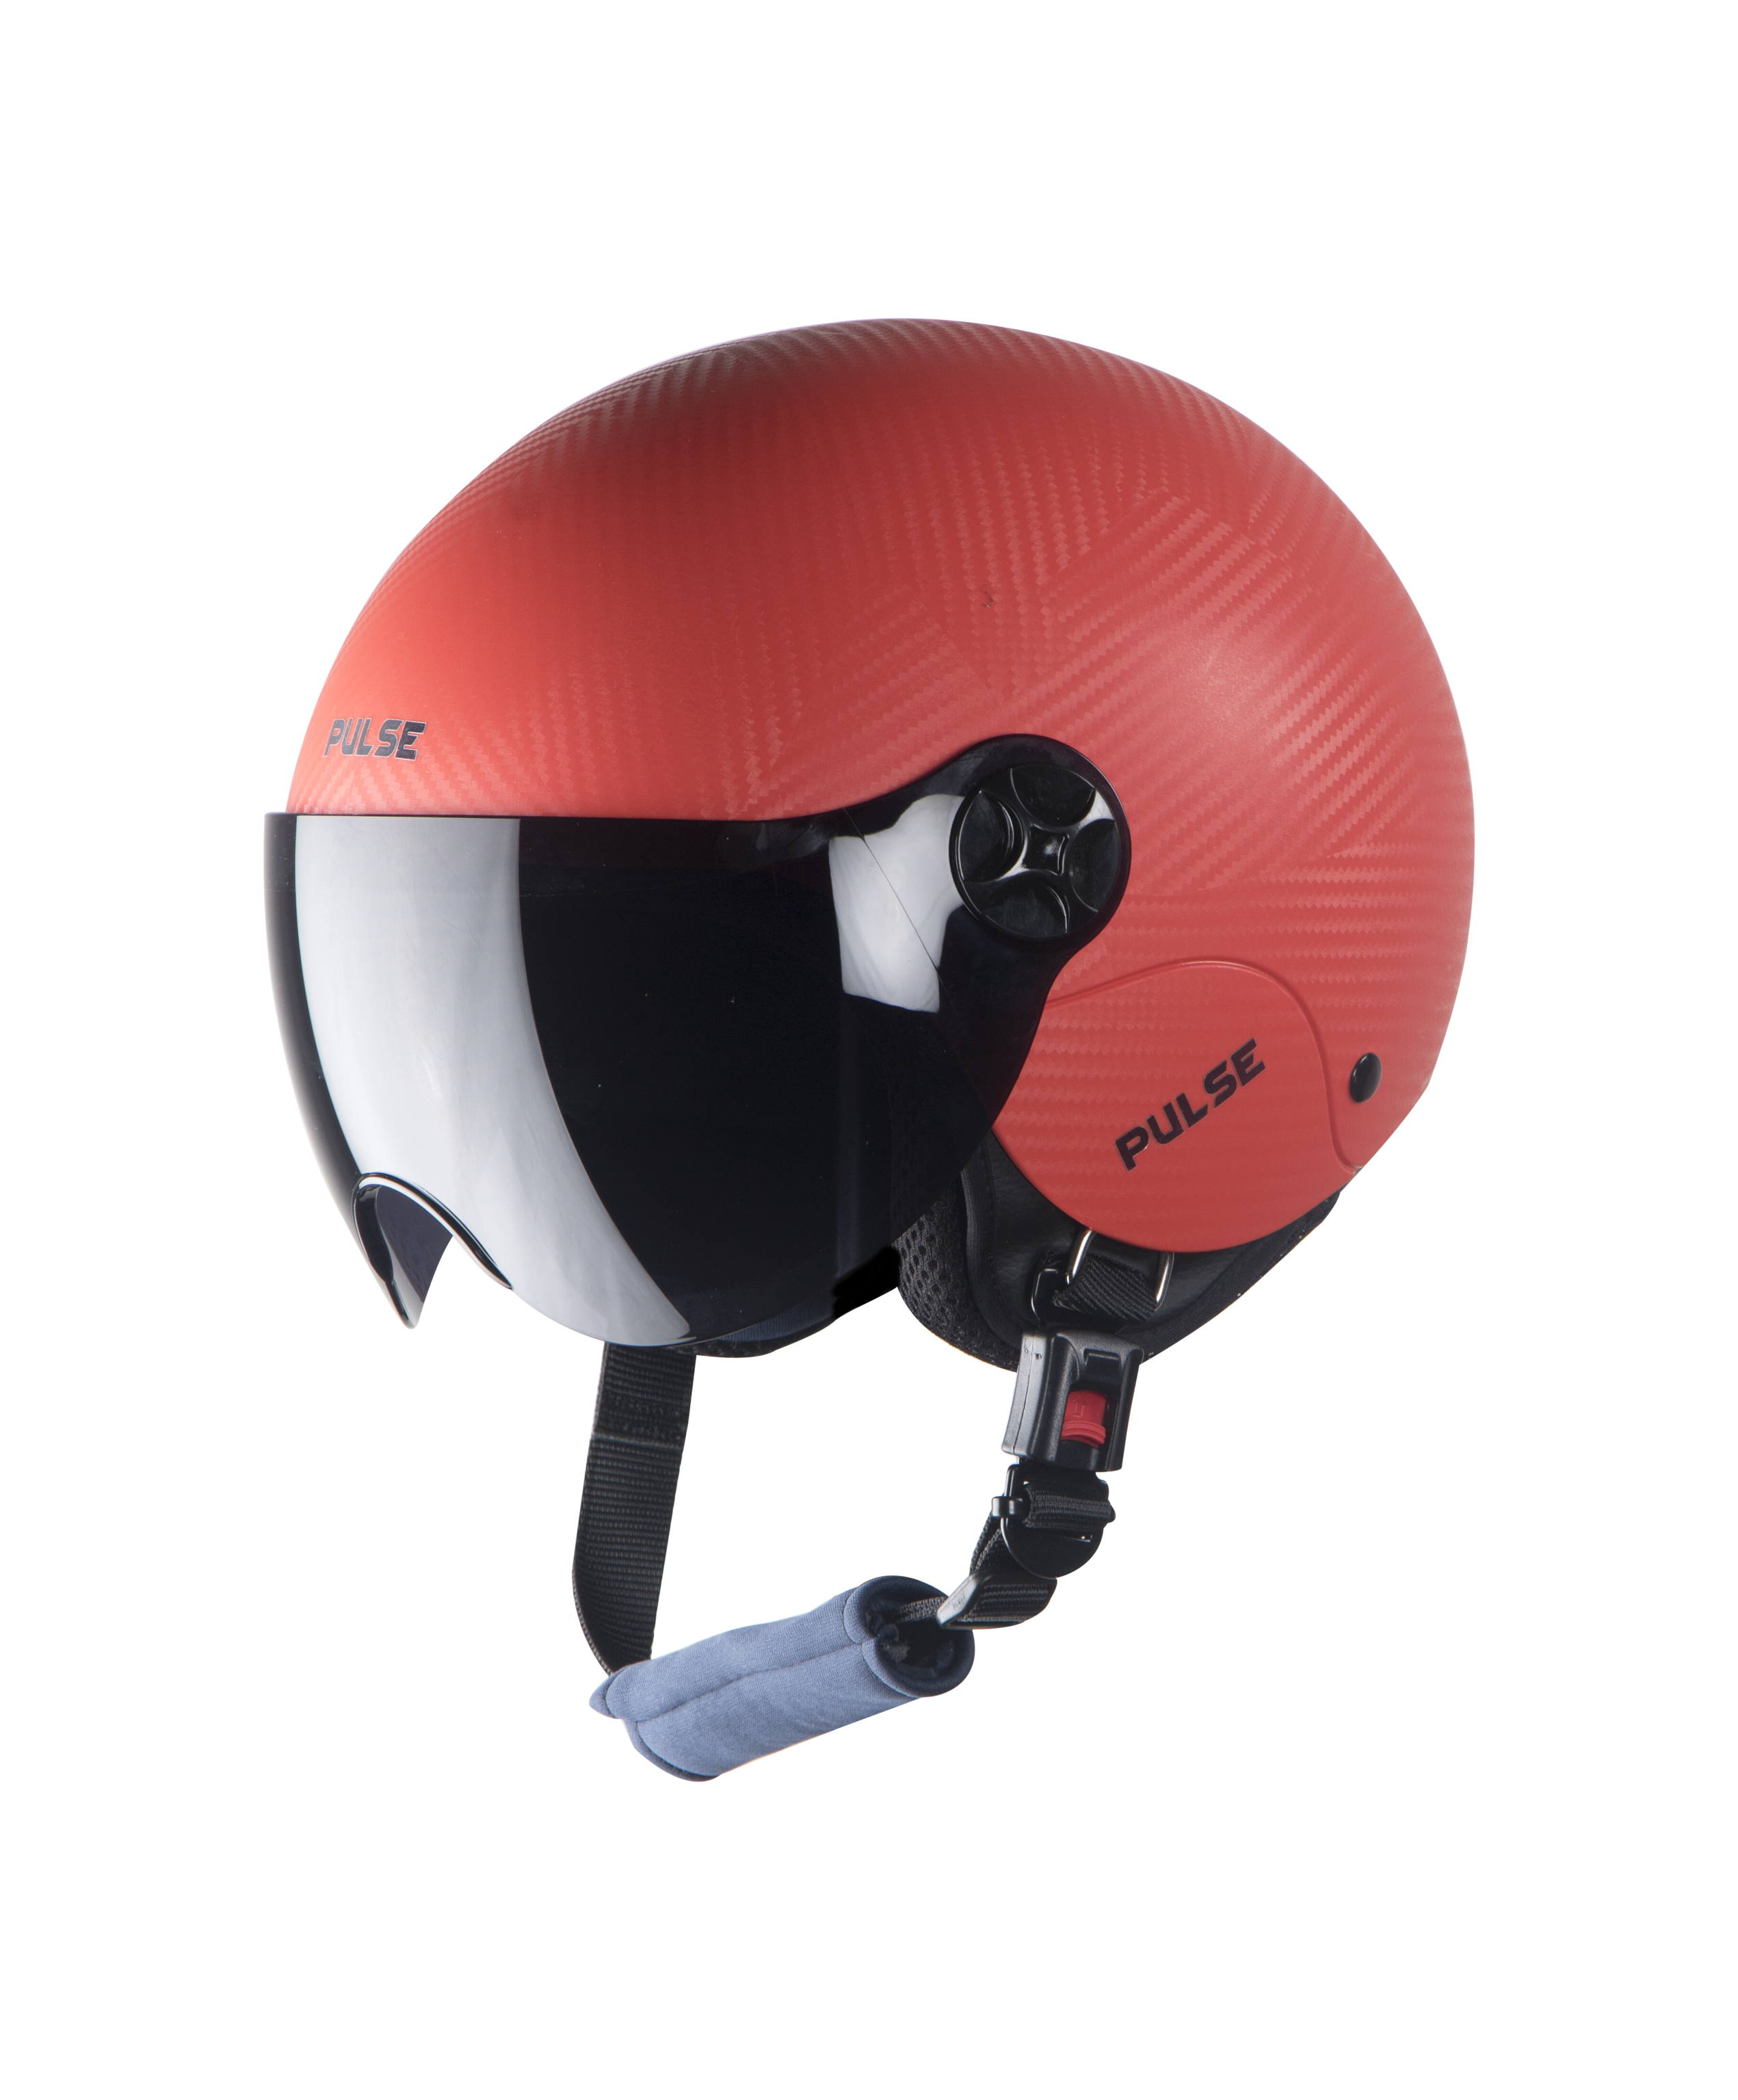 SBH-16 Pulse Dashing Red (For Boys)( Fitted With Clear Visor Extra Smoke Visor Free)